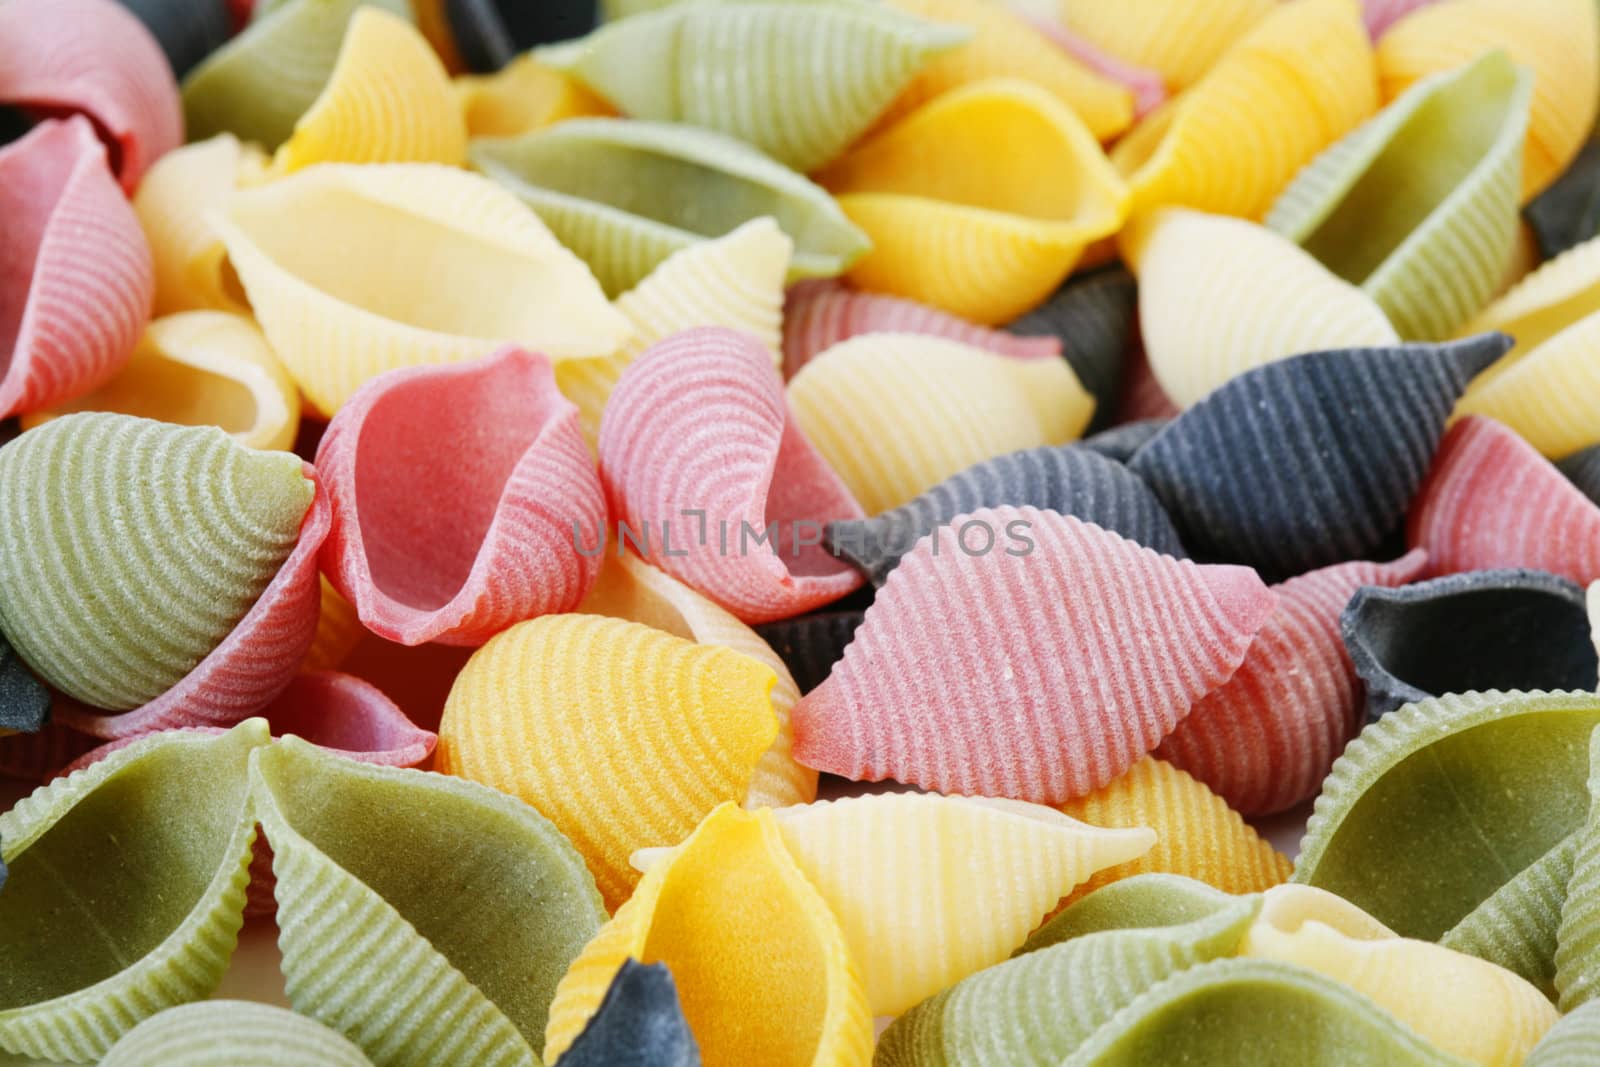 A background of variable colorfull pasta shells